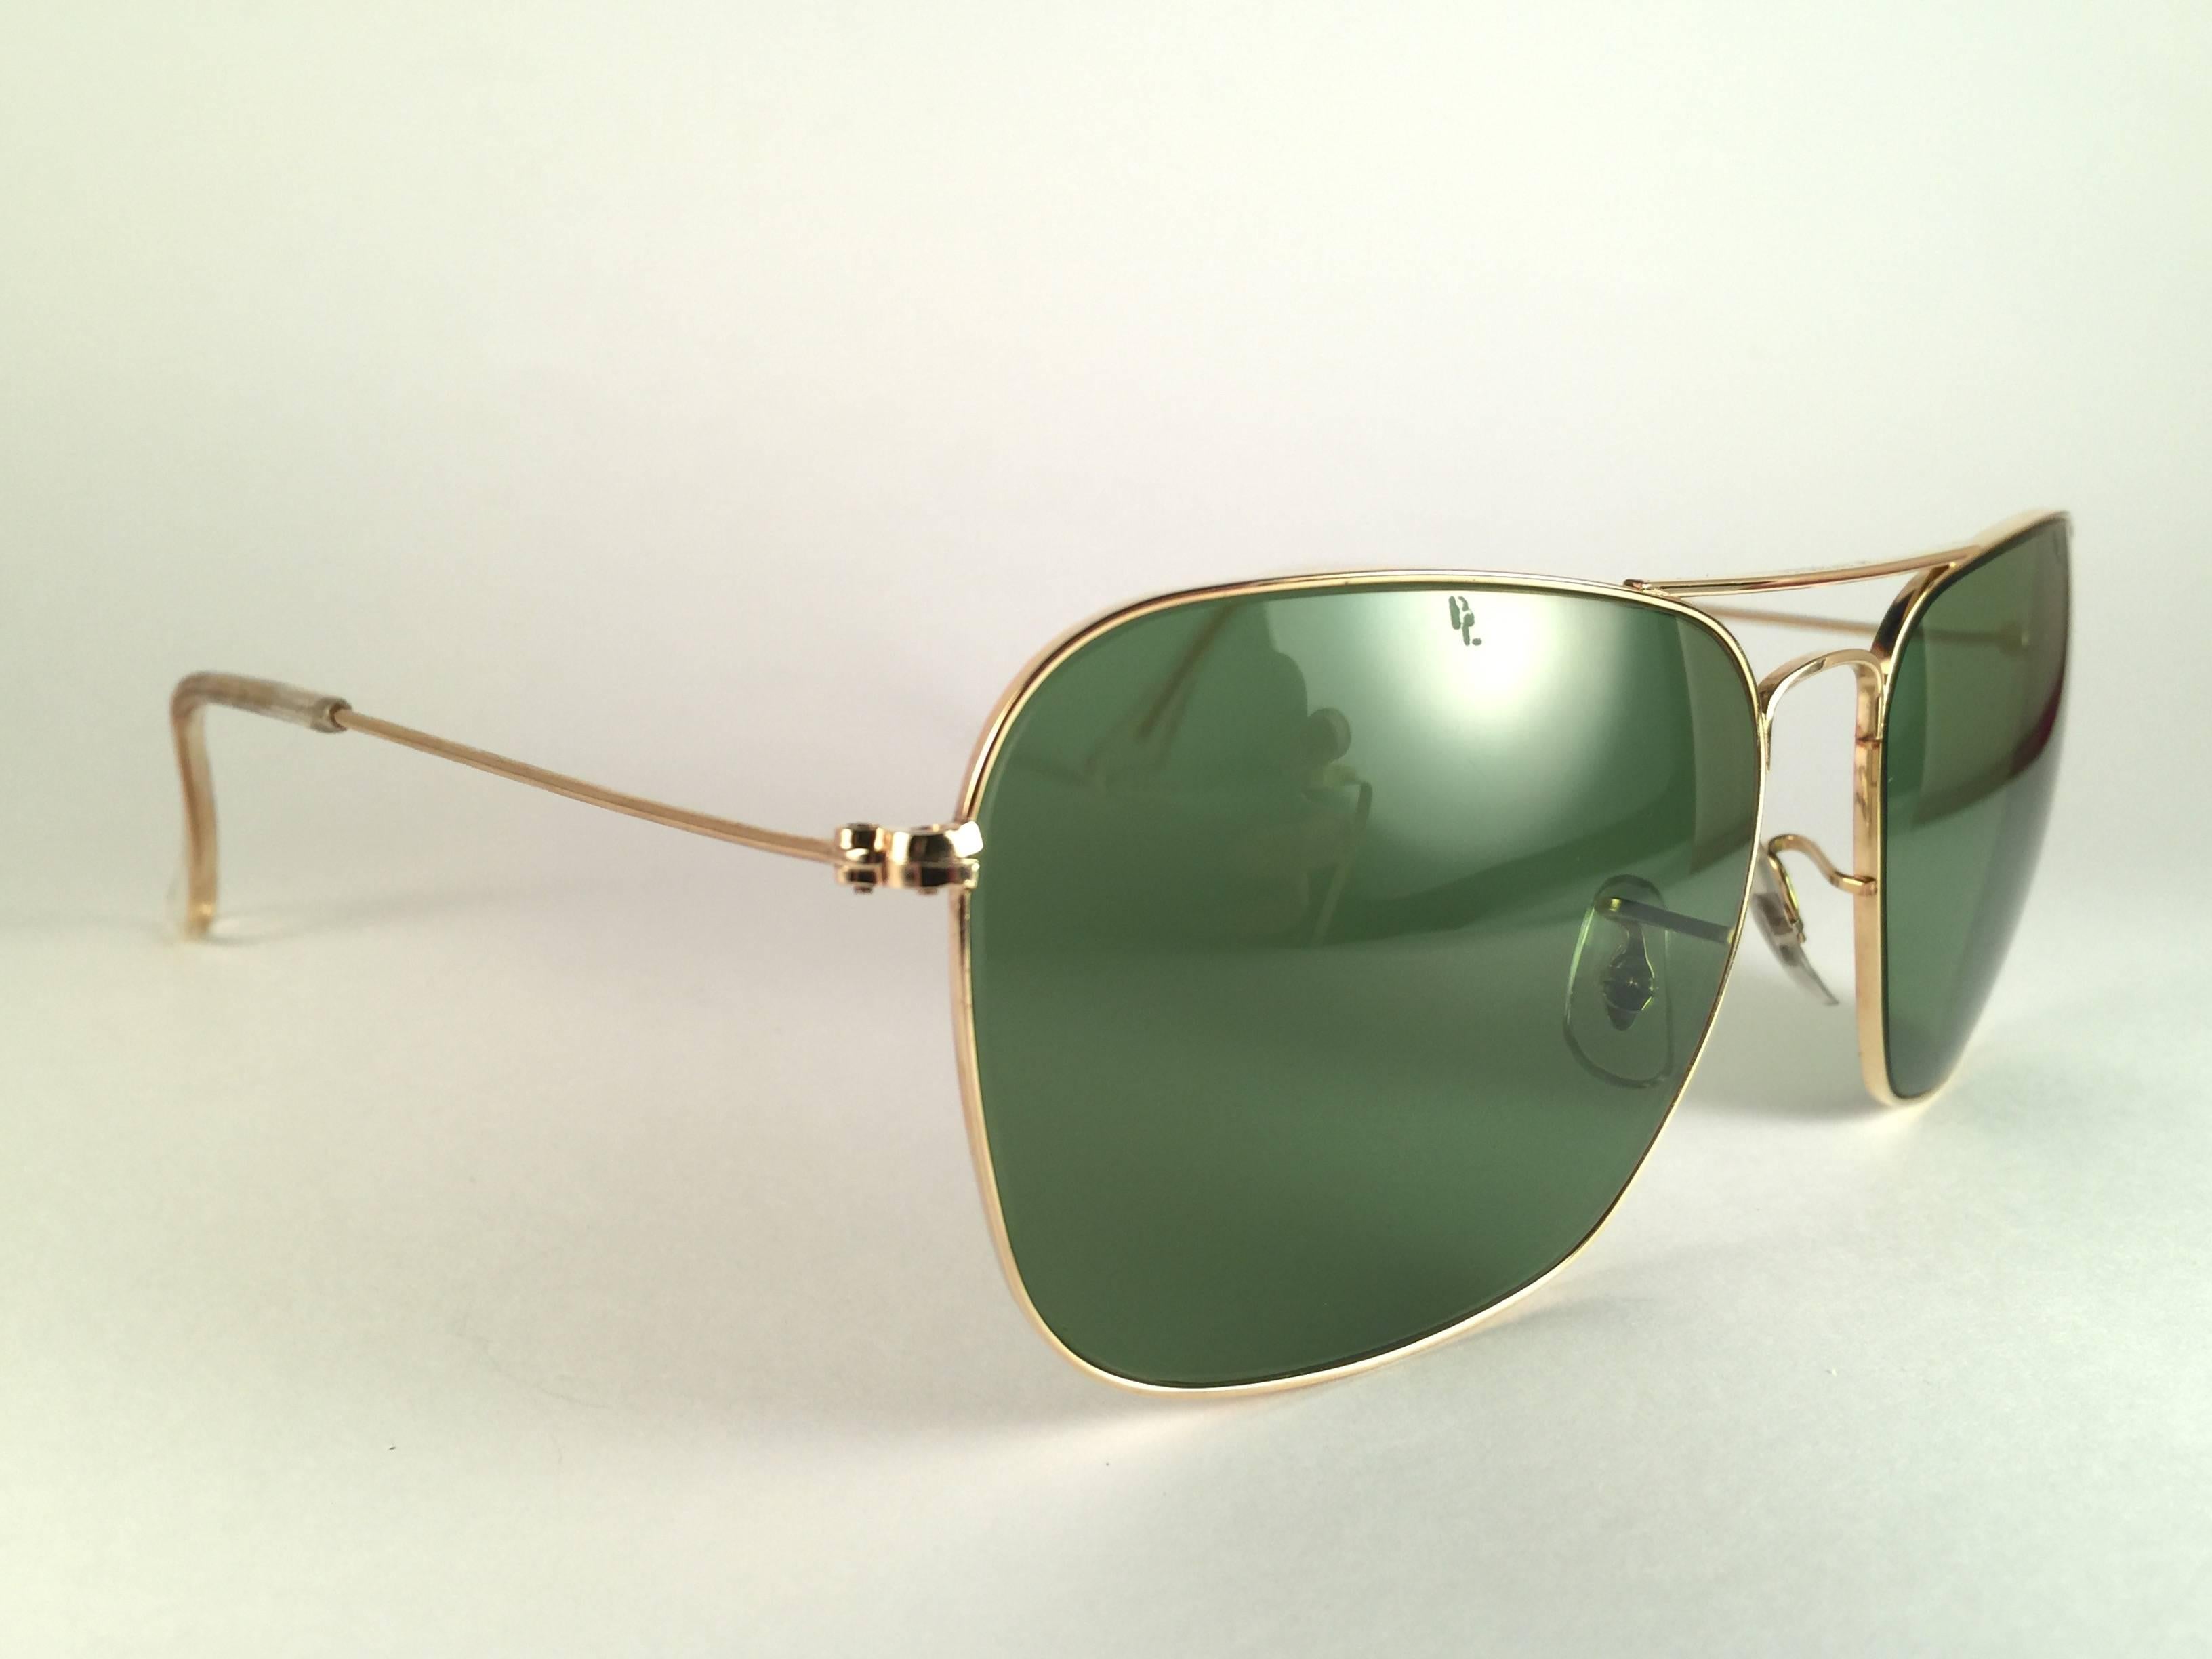 New Vintage Ray Ban Caravan gold plated in 58MM size. Lenses are RB3 green,  B&L etched in the lenses, so mid 1970's.   
Comes with its original Ray Ban B&L case.  
A seldom piece in new, never worn or displayed condition.